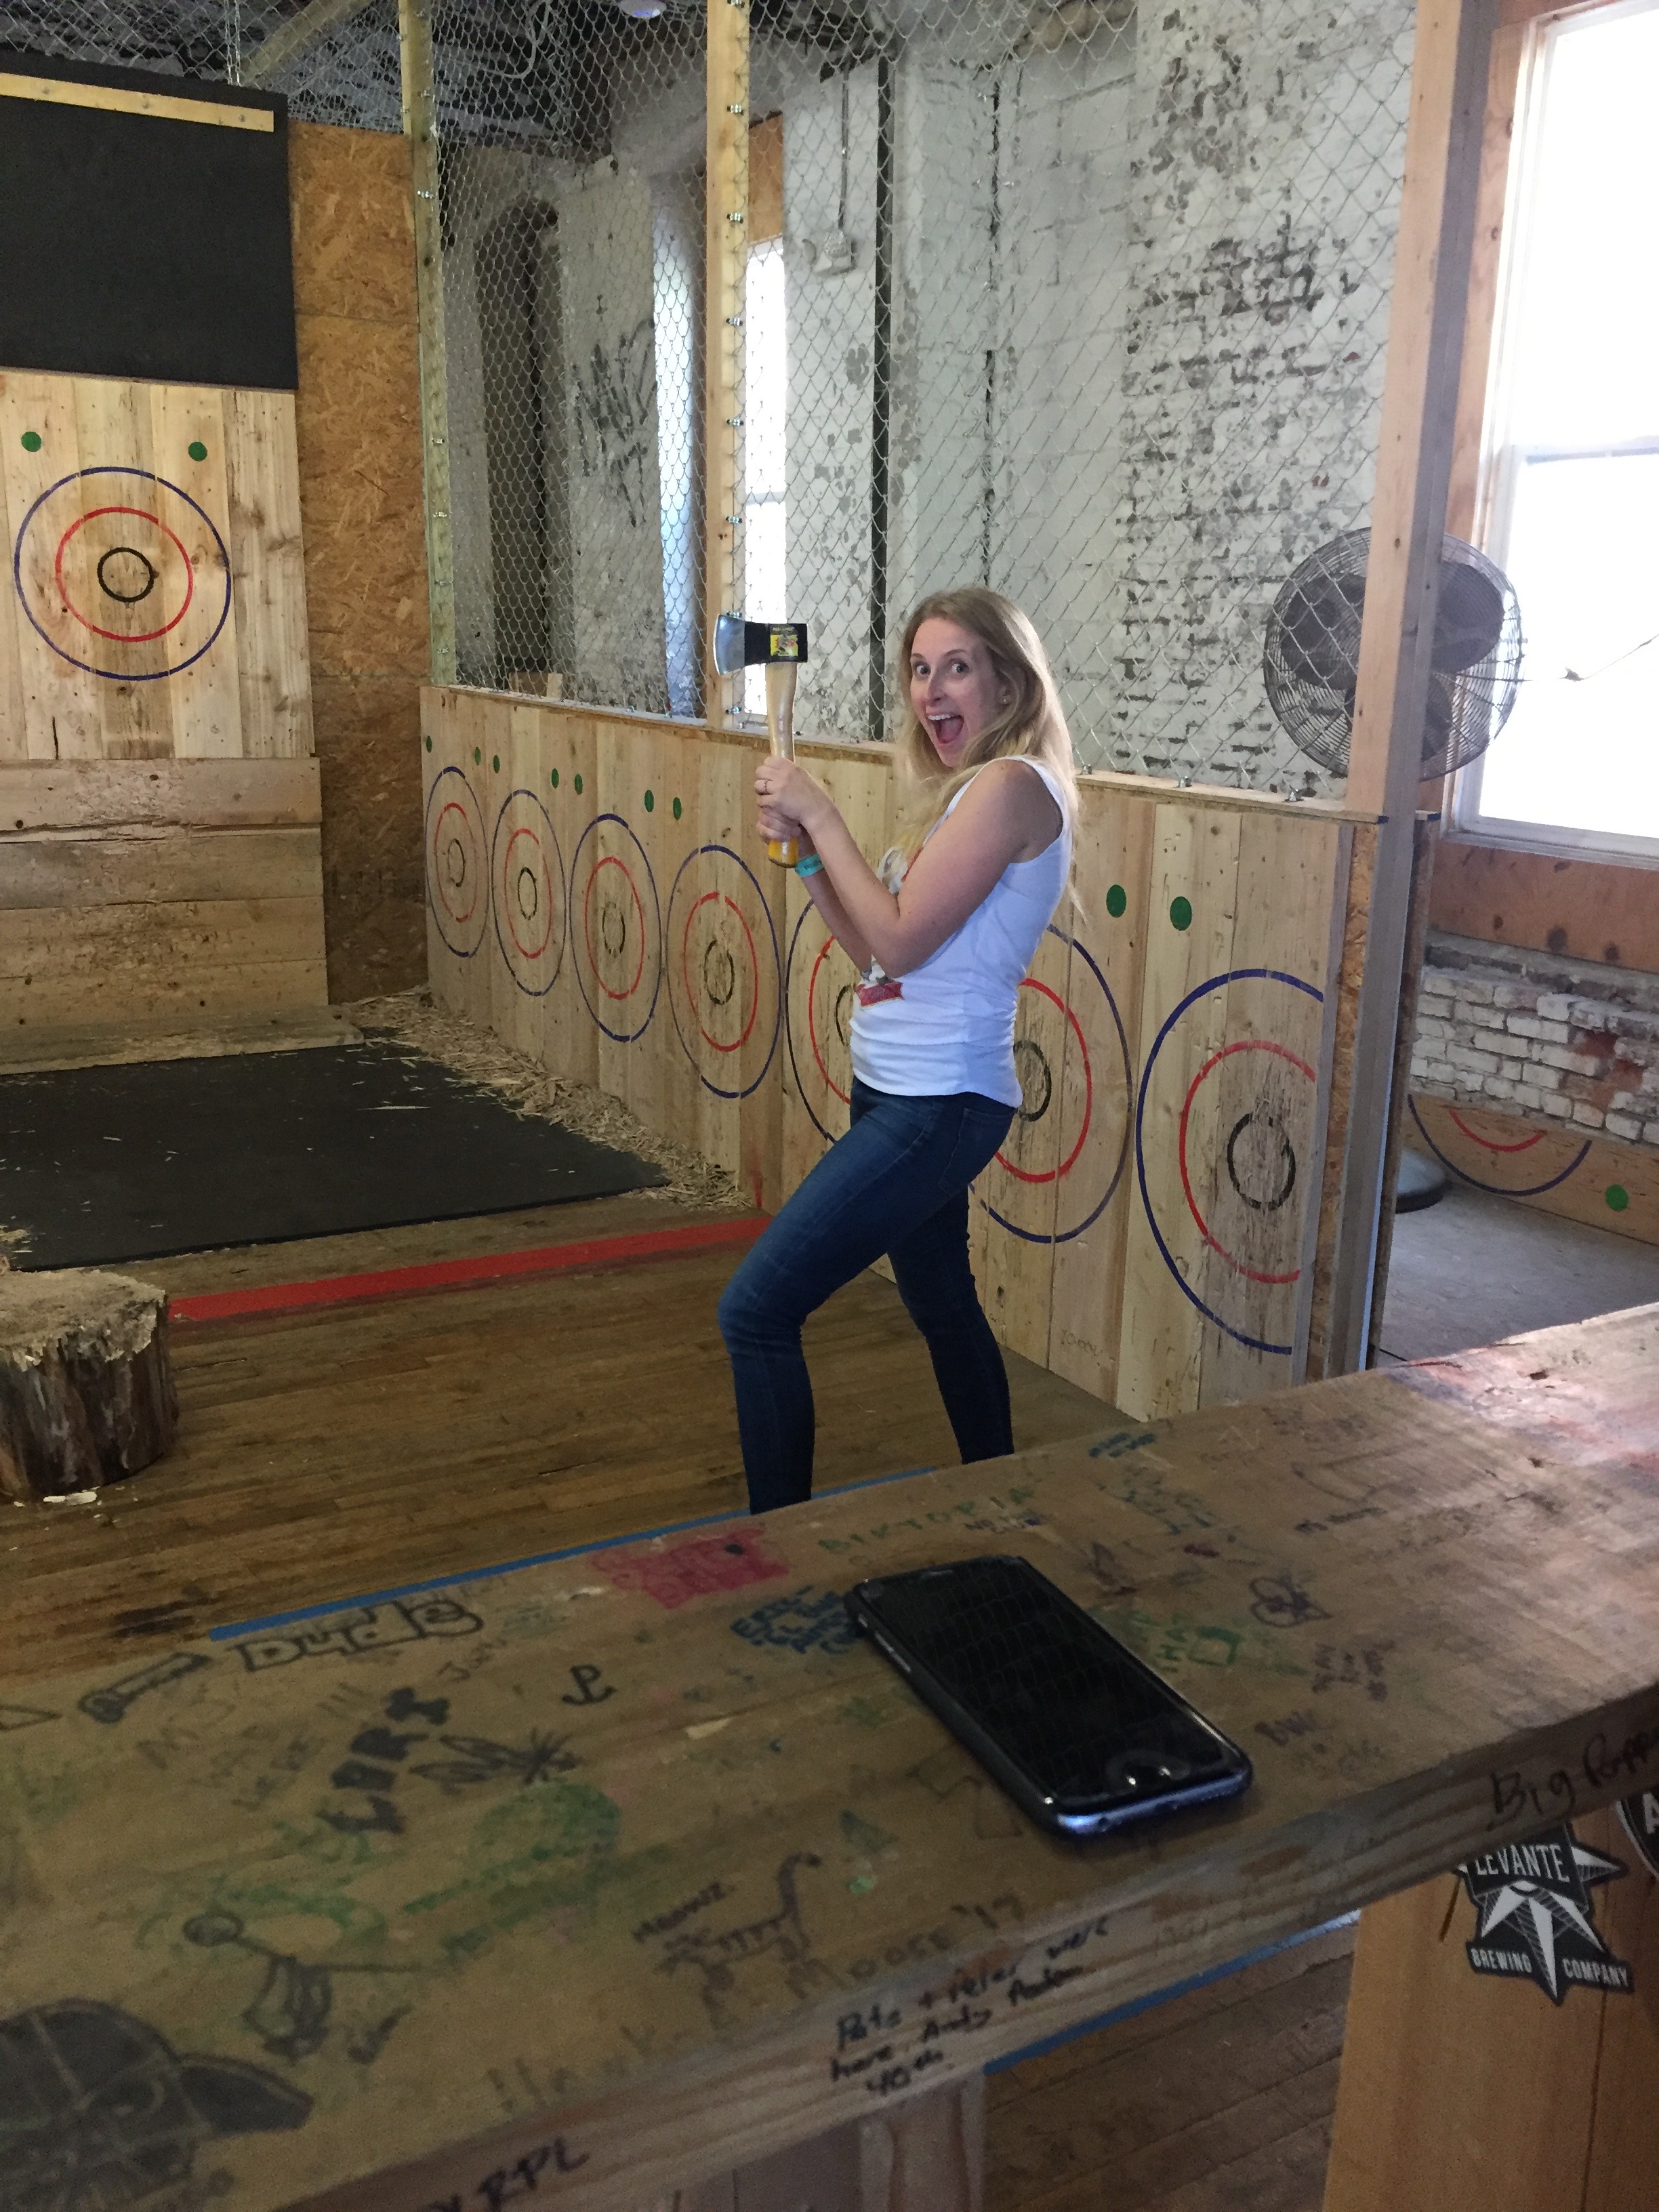 Getting ready to throw axes like a boss.